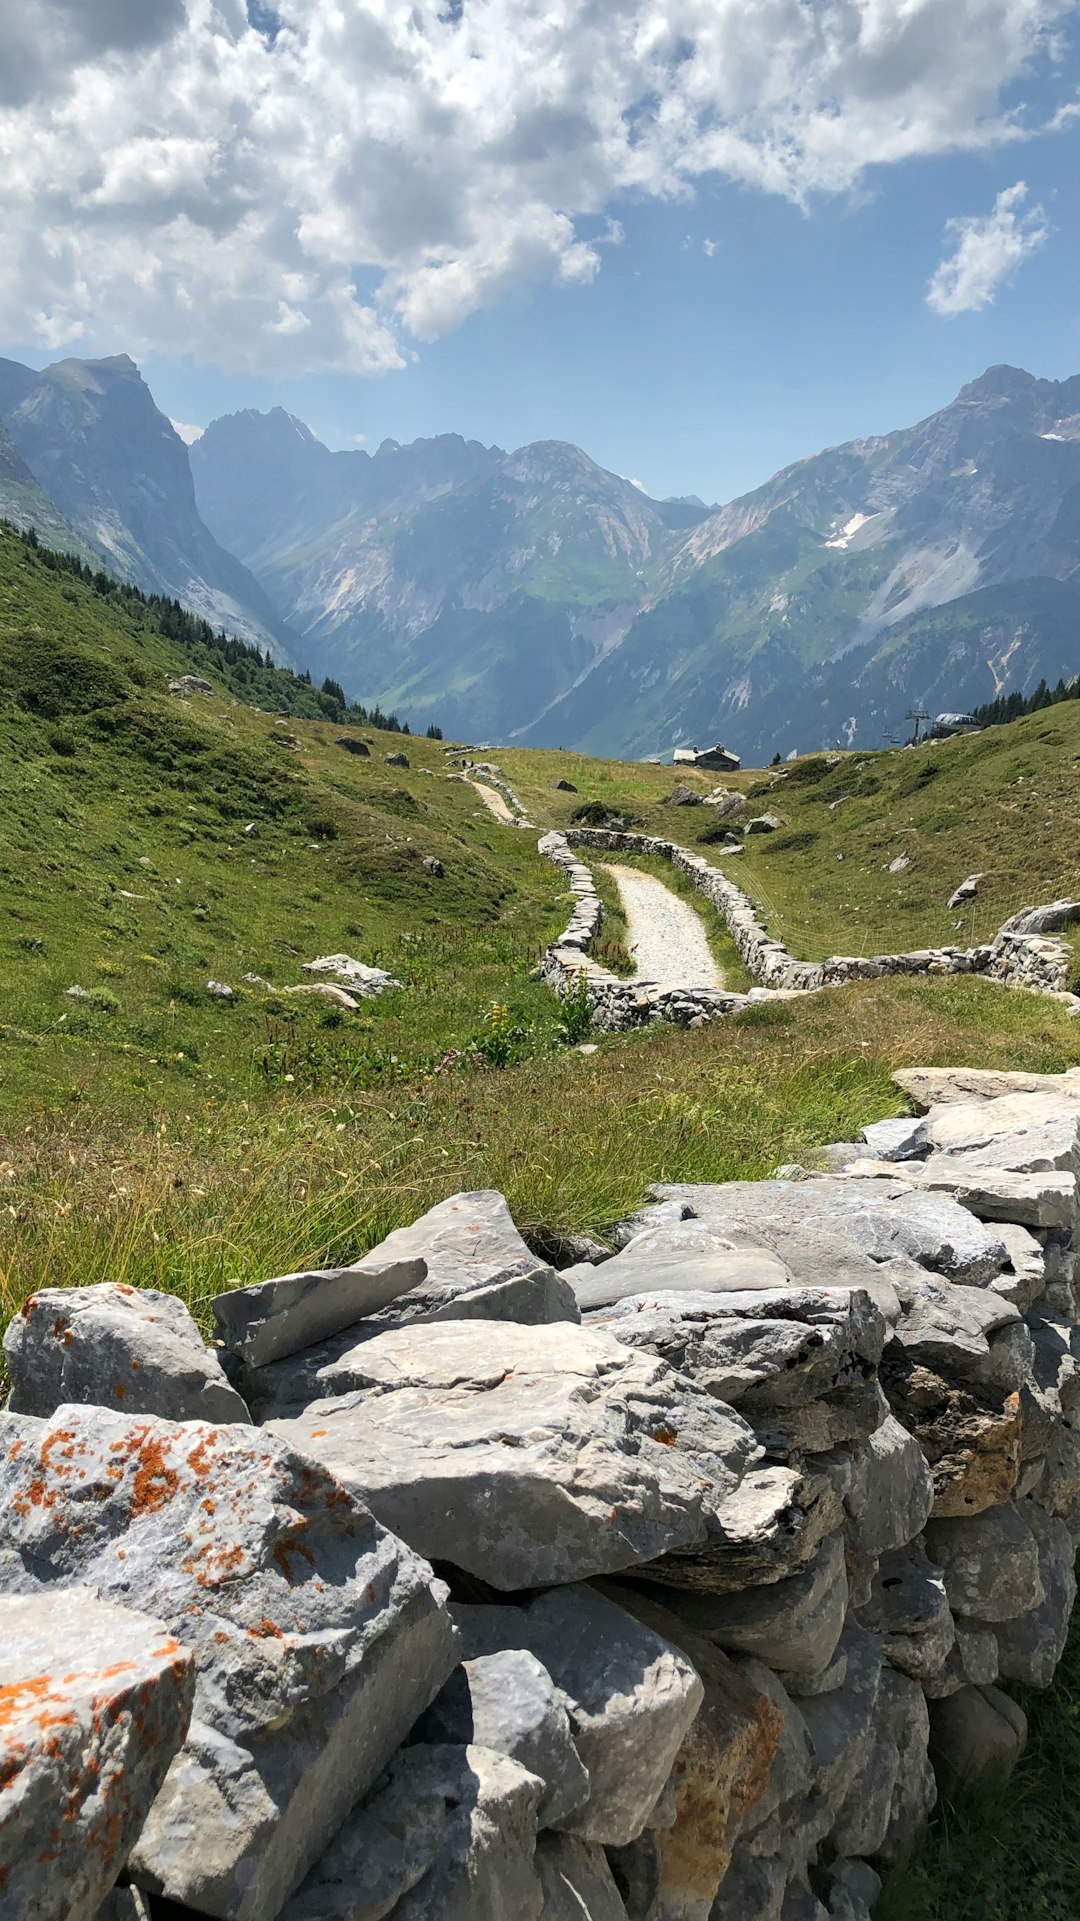 Travel Tips and Stories of Vanoise National Park in France